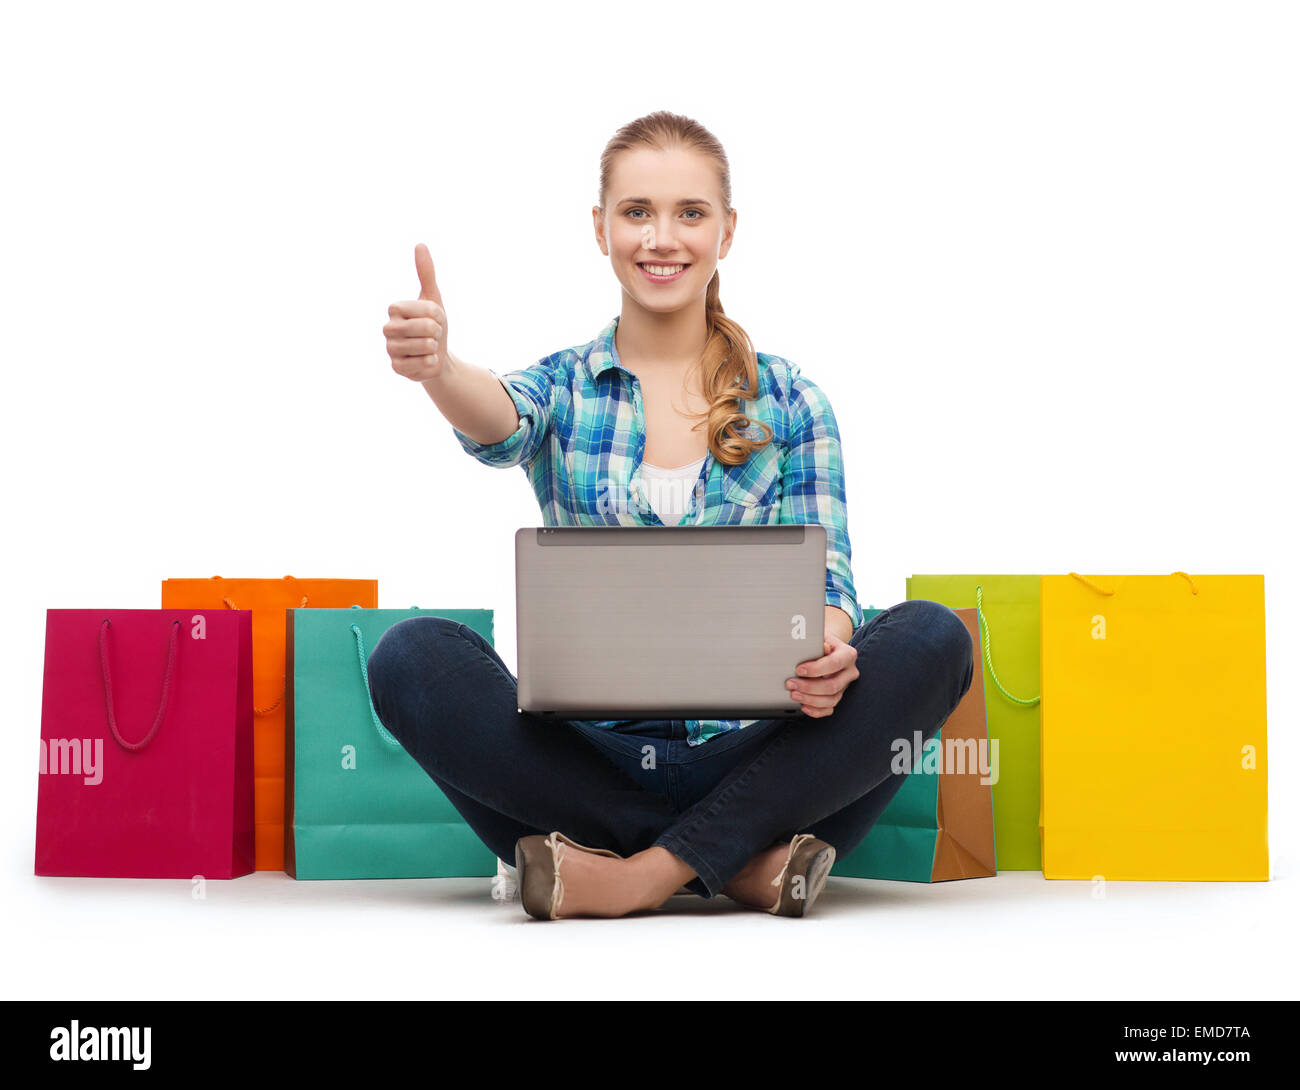 smiling girl with laptop comuter and shopping bags Stock Photo